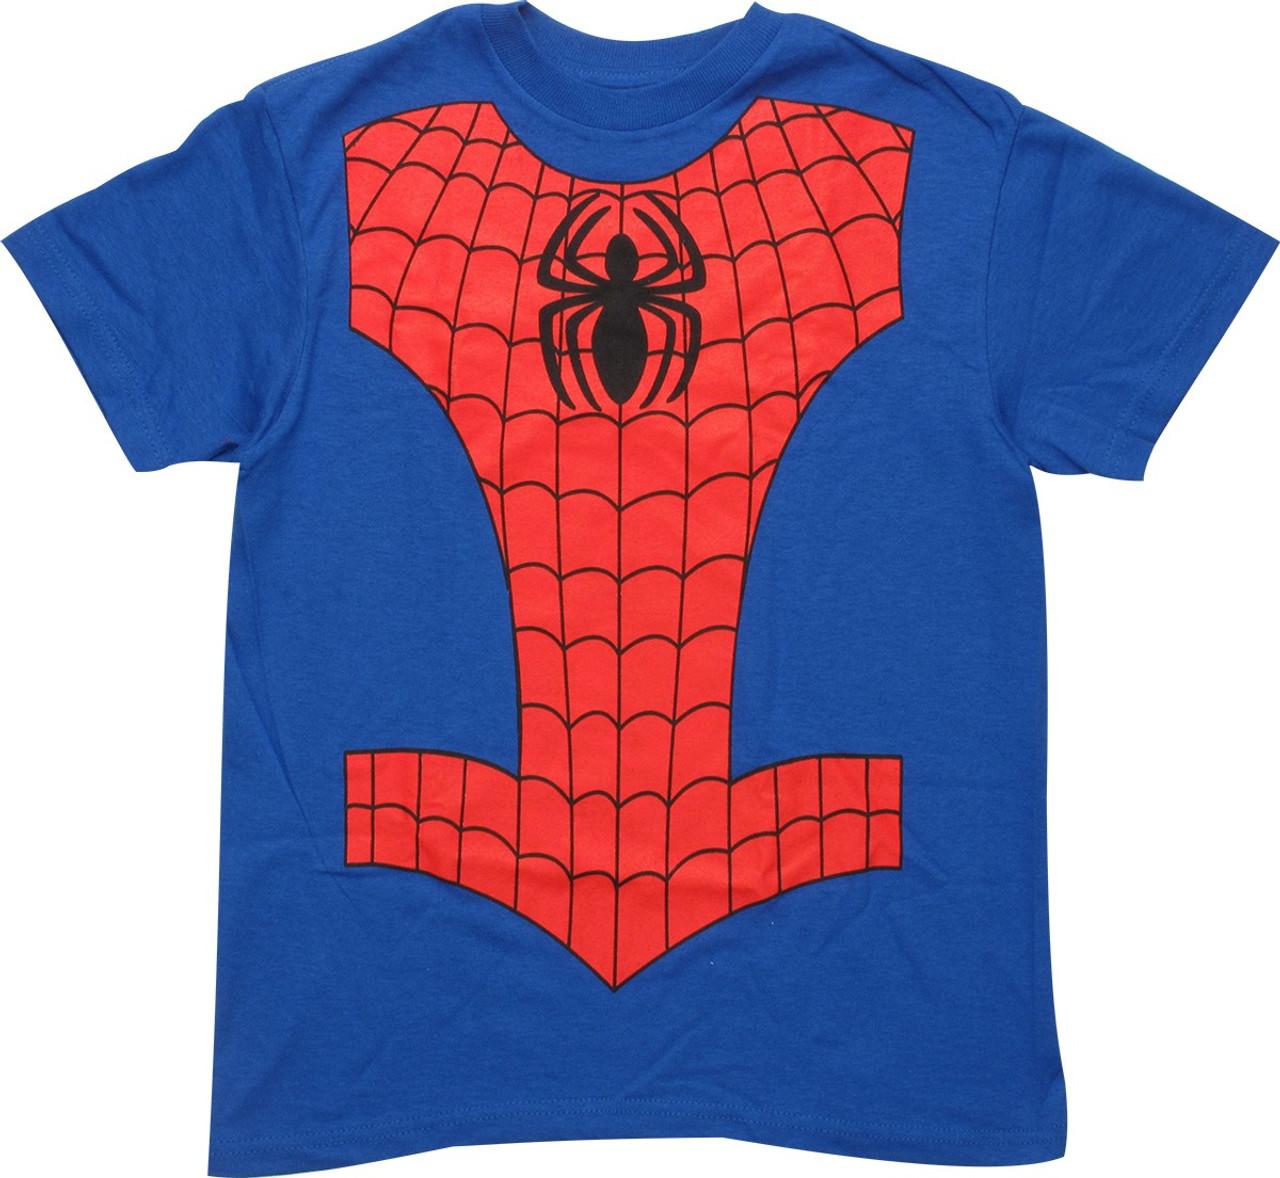 Child Officially Licensed Boys Marvel Classic Spiderman Halloween Costume  Medium, Red and Blue